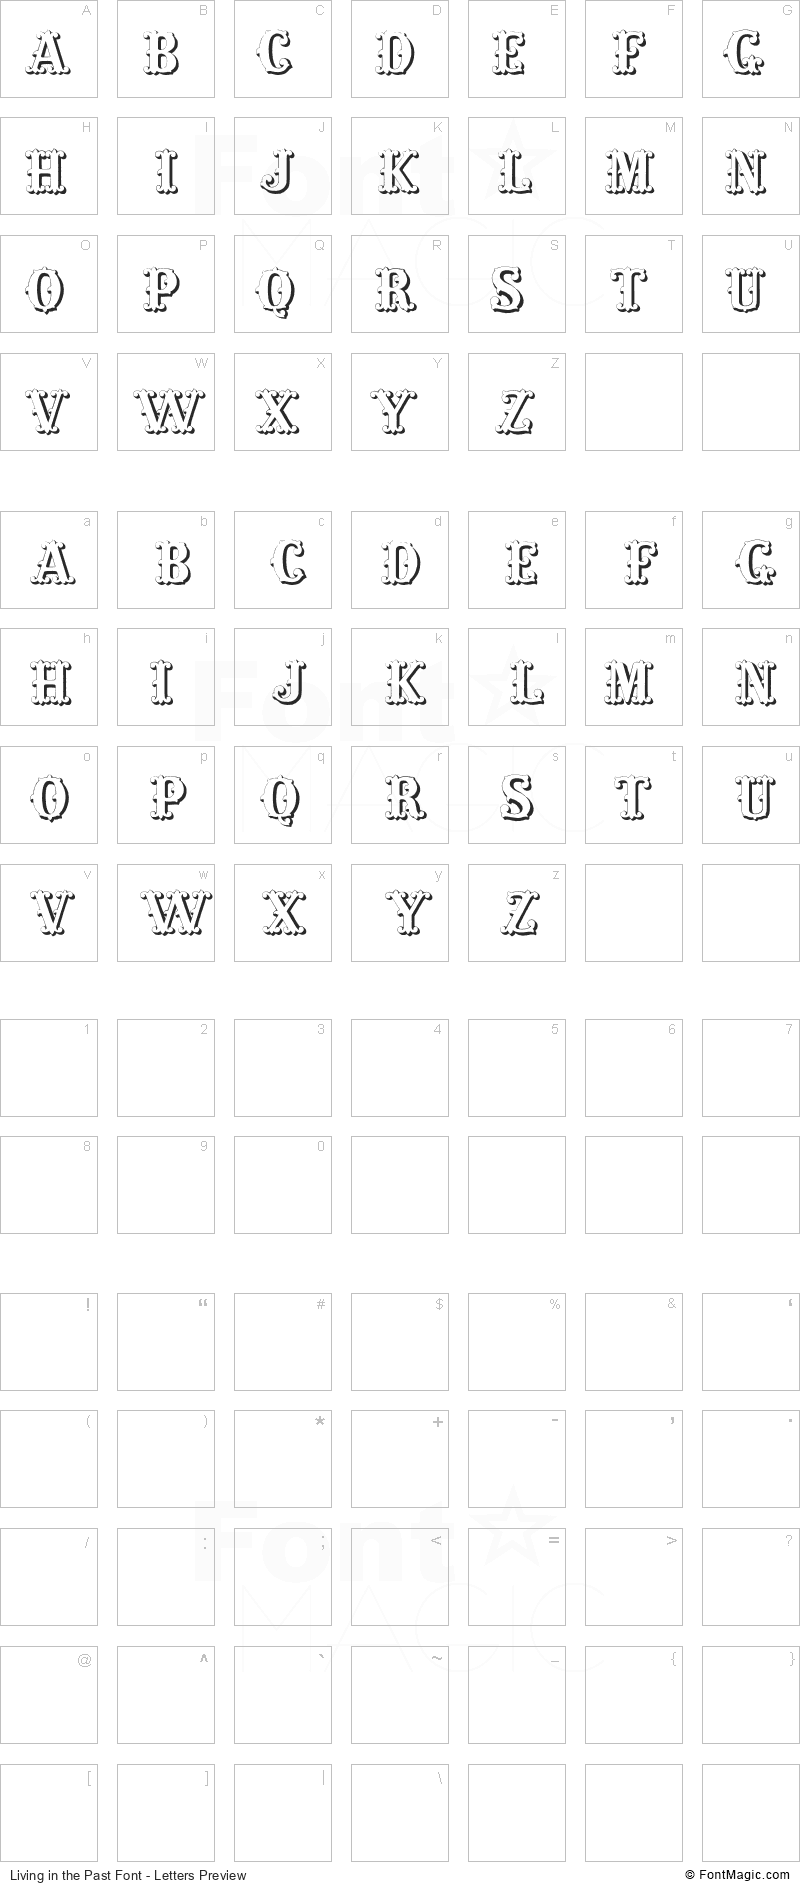 Living in the Past Font - All Latters Preview Chart